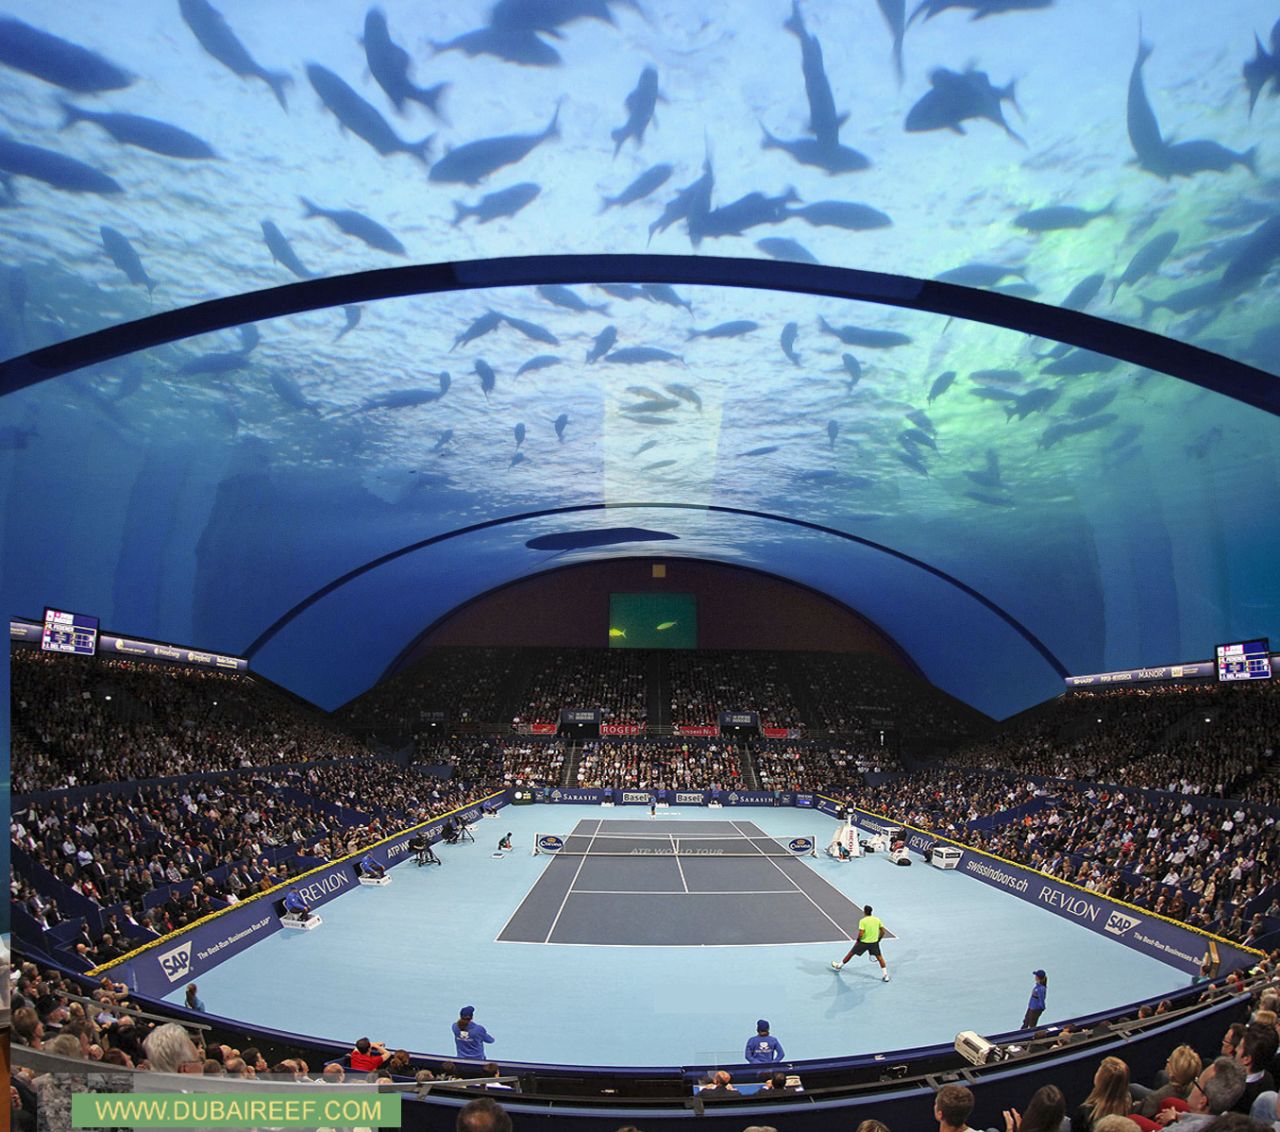 Game, set and catch of the day? Polish architect Kotala Krzysztof has come up with a unique court concept which would allow tennis matches to be contested underwater.